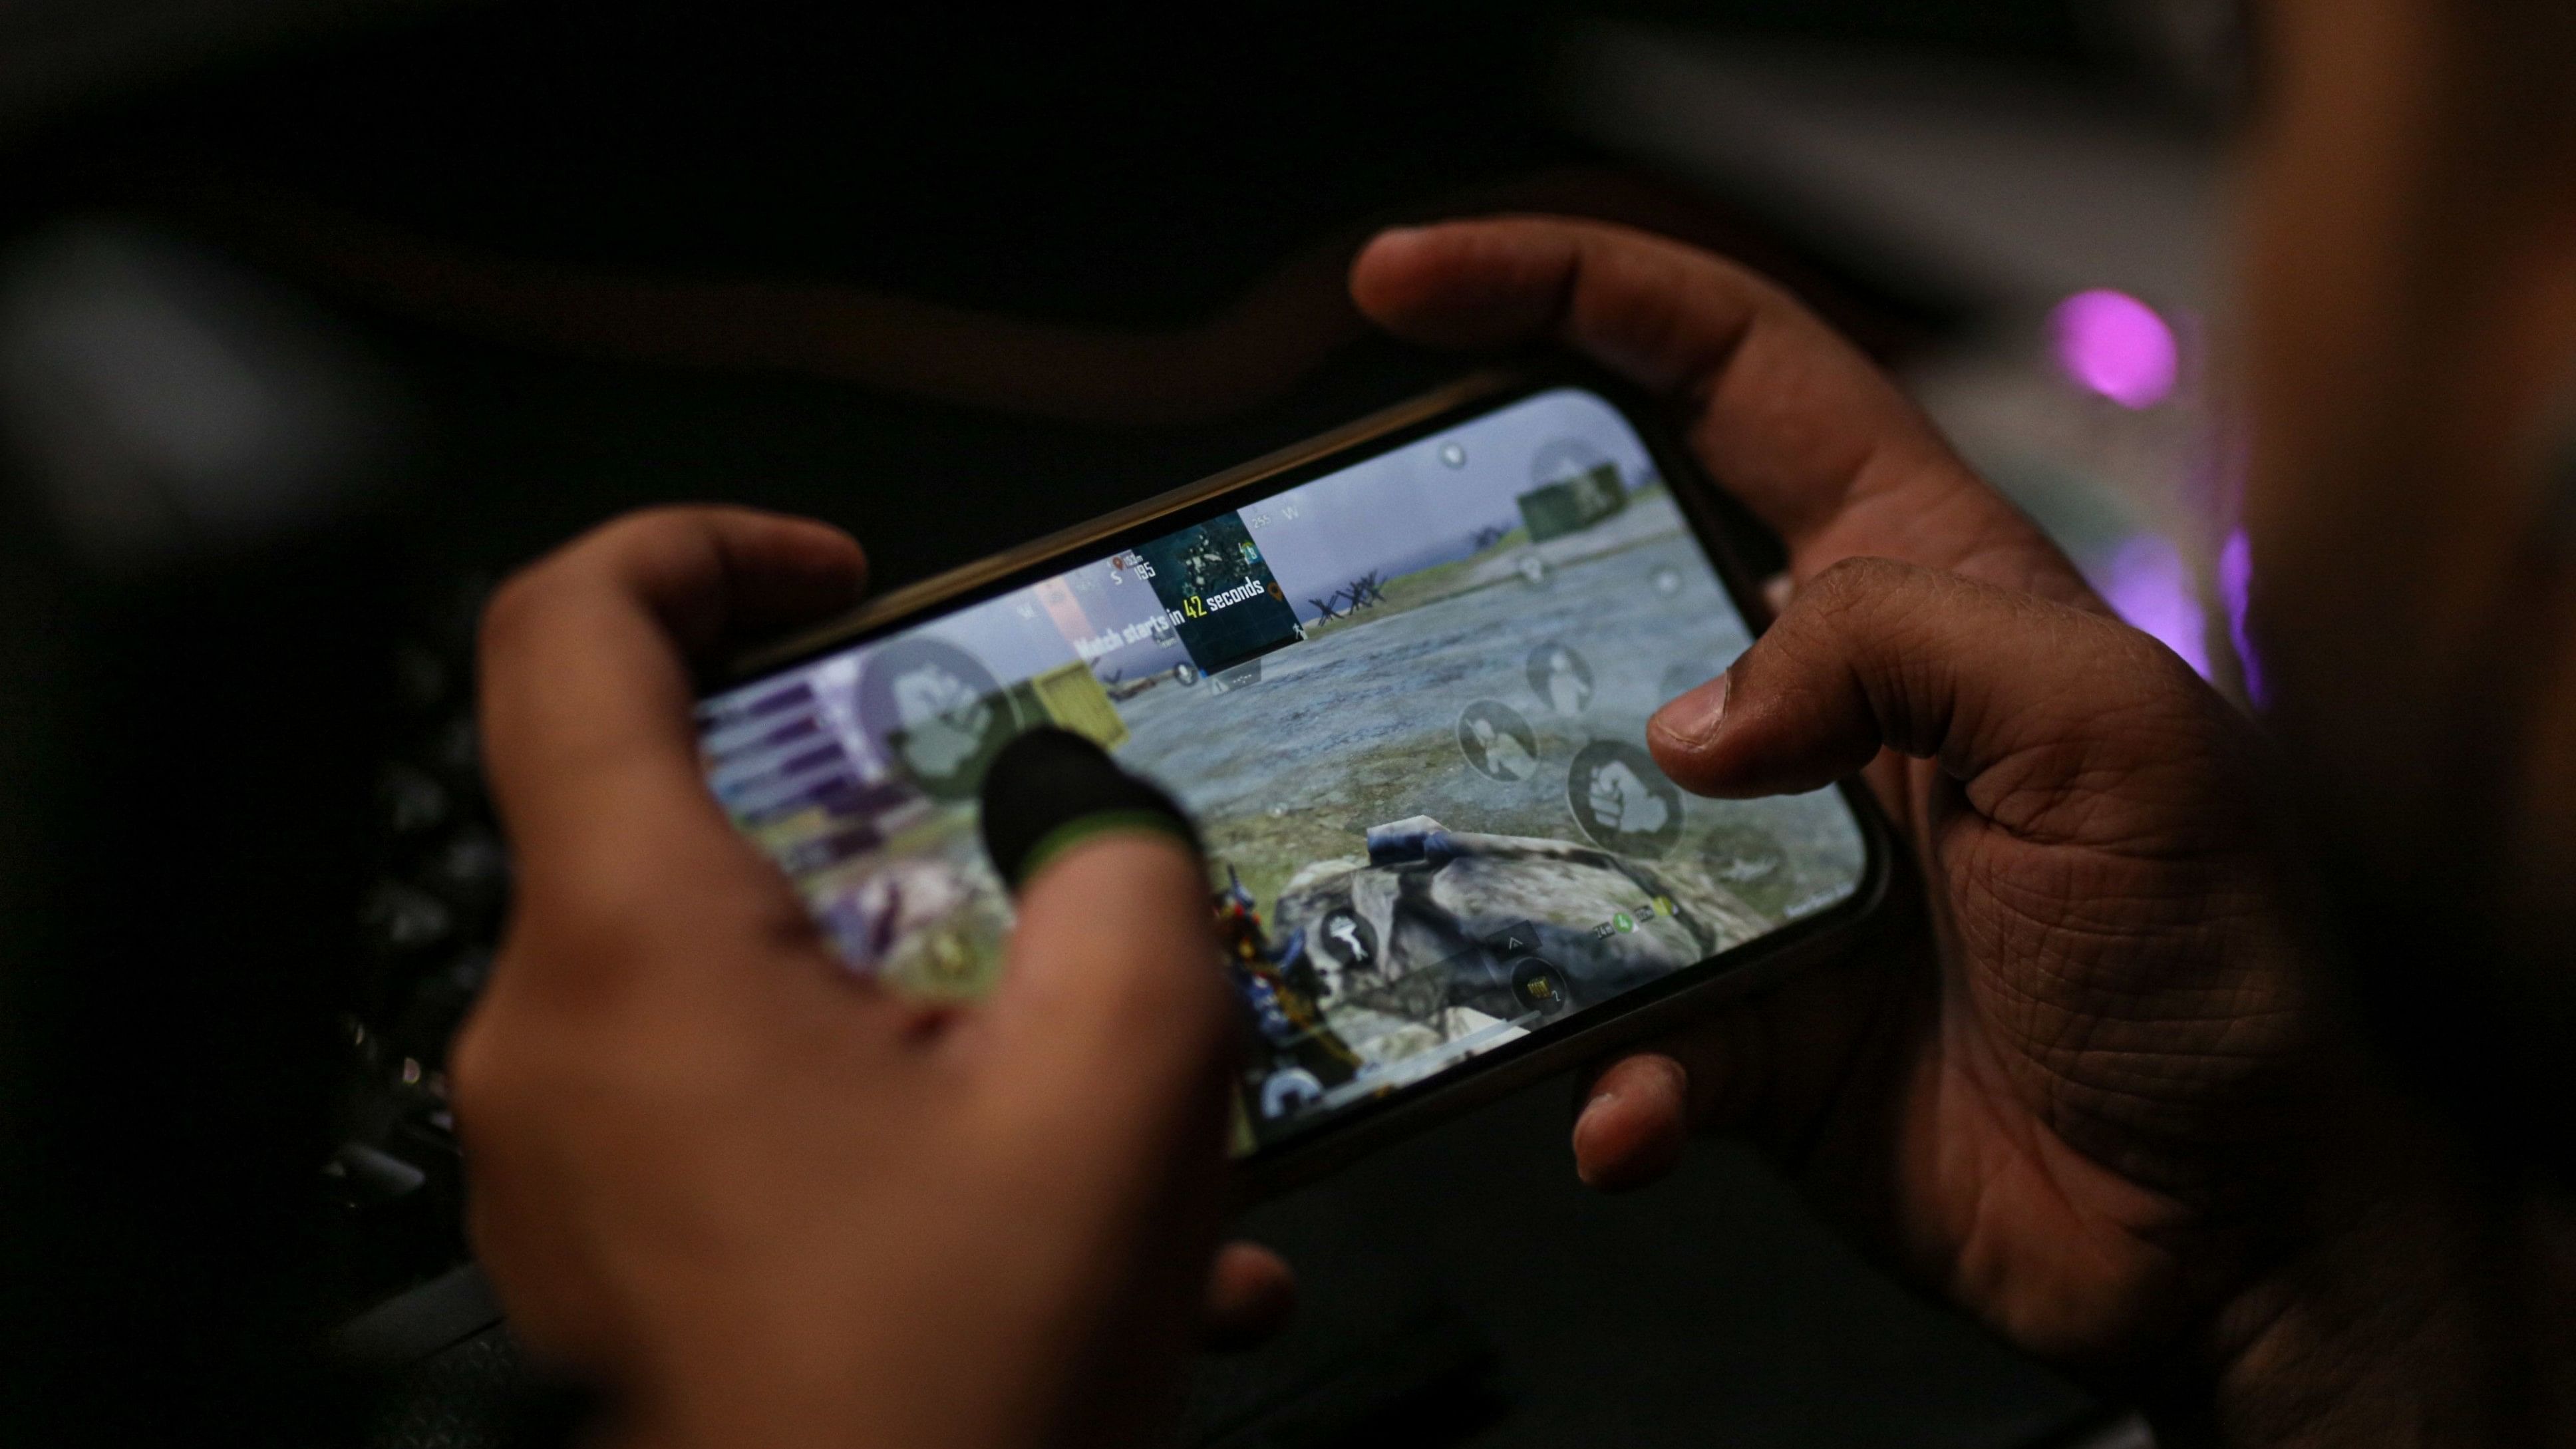 <div class="paragraphs"><p>Indian PUBG mobile streamer Salman Ahmad (8 Bit Mamba) during live gaming stream at a S8UL gaming house in Navi Mumbai, India, on Friday, July 22, 2022. </p></div>